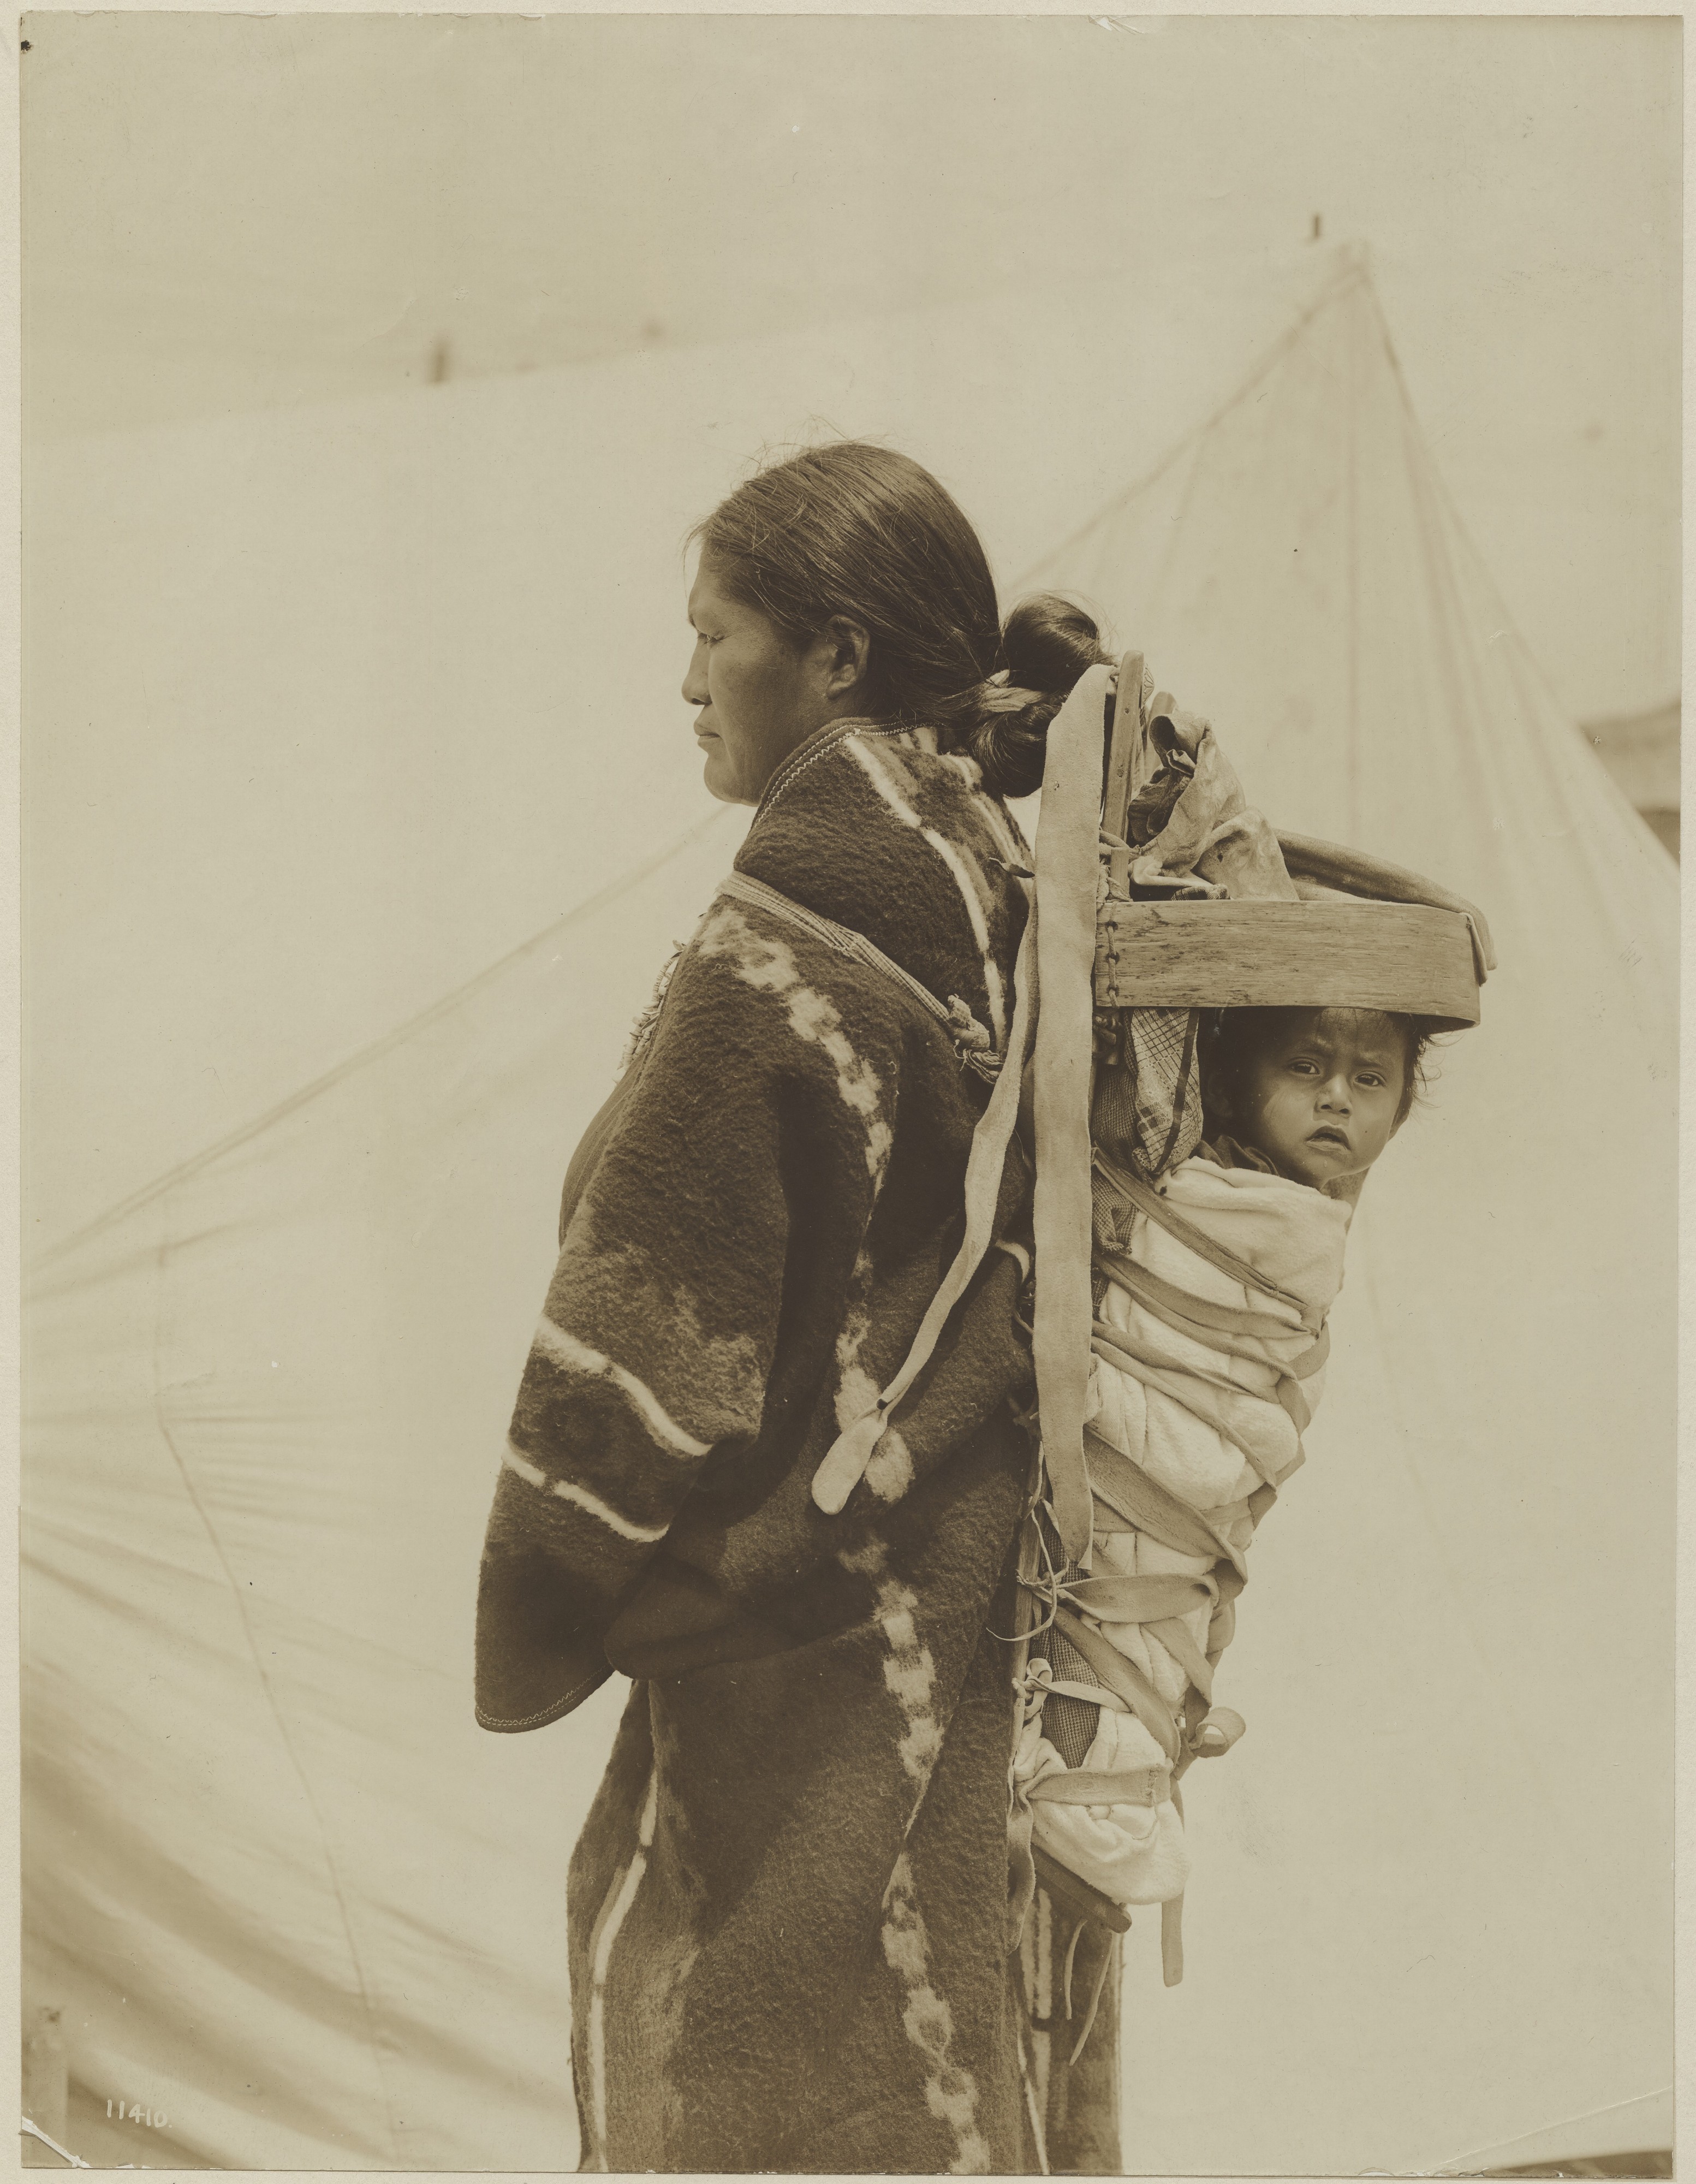 Navajo American Indian woman carrying her child in a cradleboard on her back in the Department of Anthropology exhibit at the 1904 World's Fair